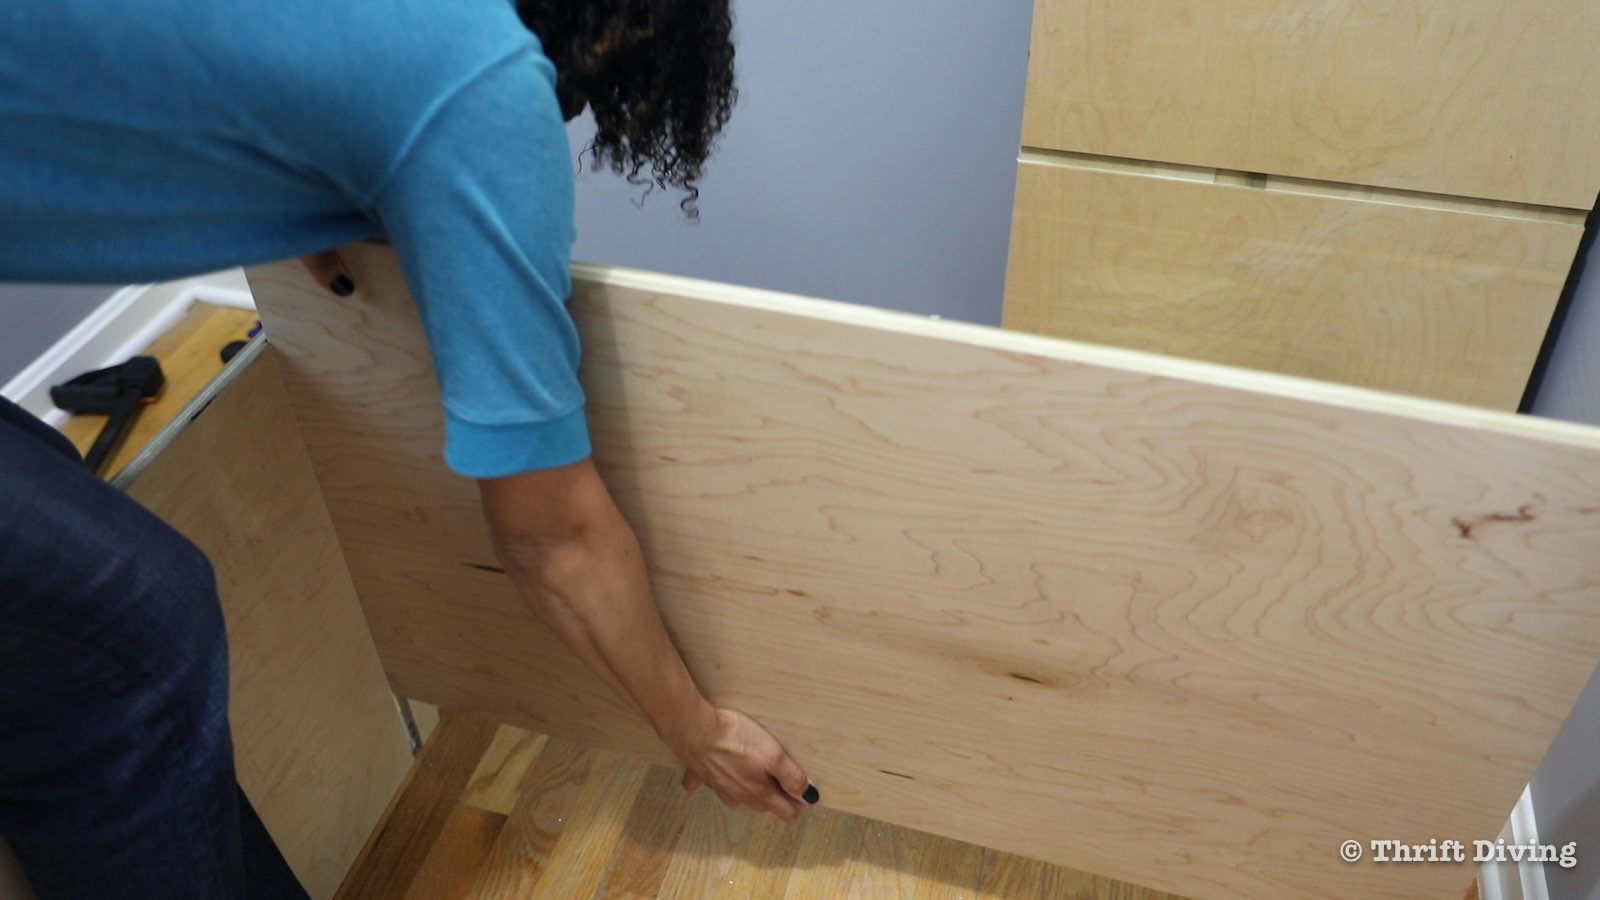 How to Build a Walk-in Closet Organizer From Scratch - Attach bottom shelf to dado with wood glue. - Thrift Diving